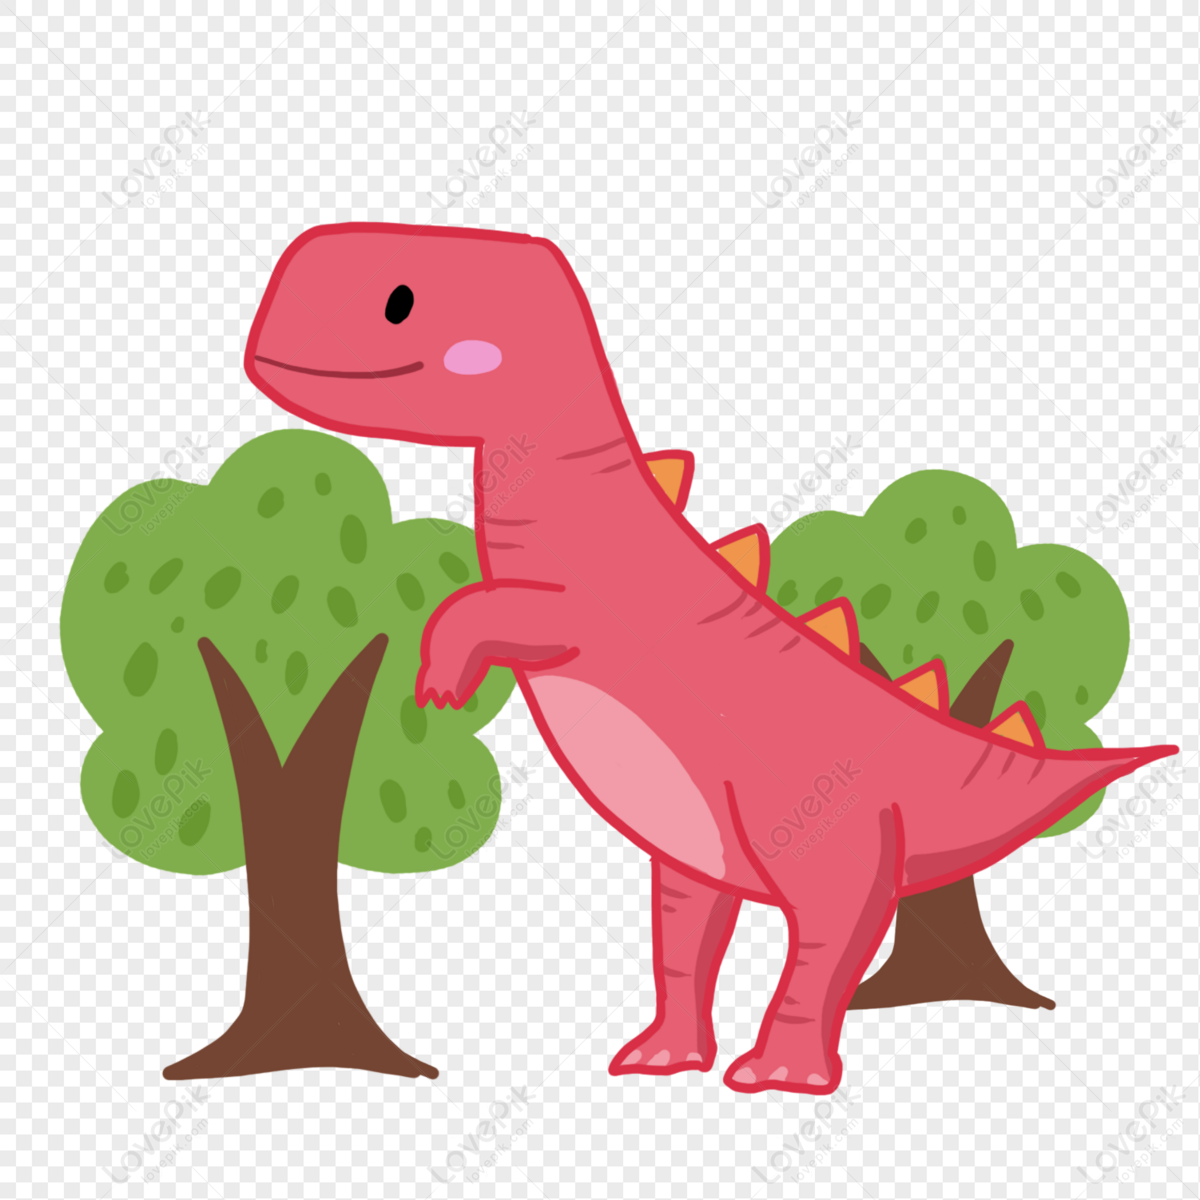 Red Cartoon Dinosaur PNG Transparent Image And Clipart Image For Free  Download - Lovepik | 401555637